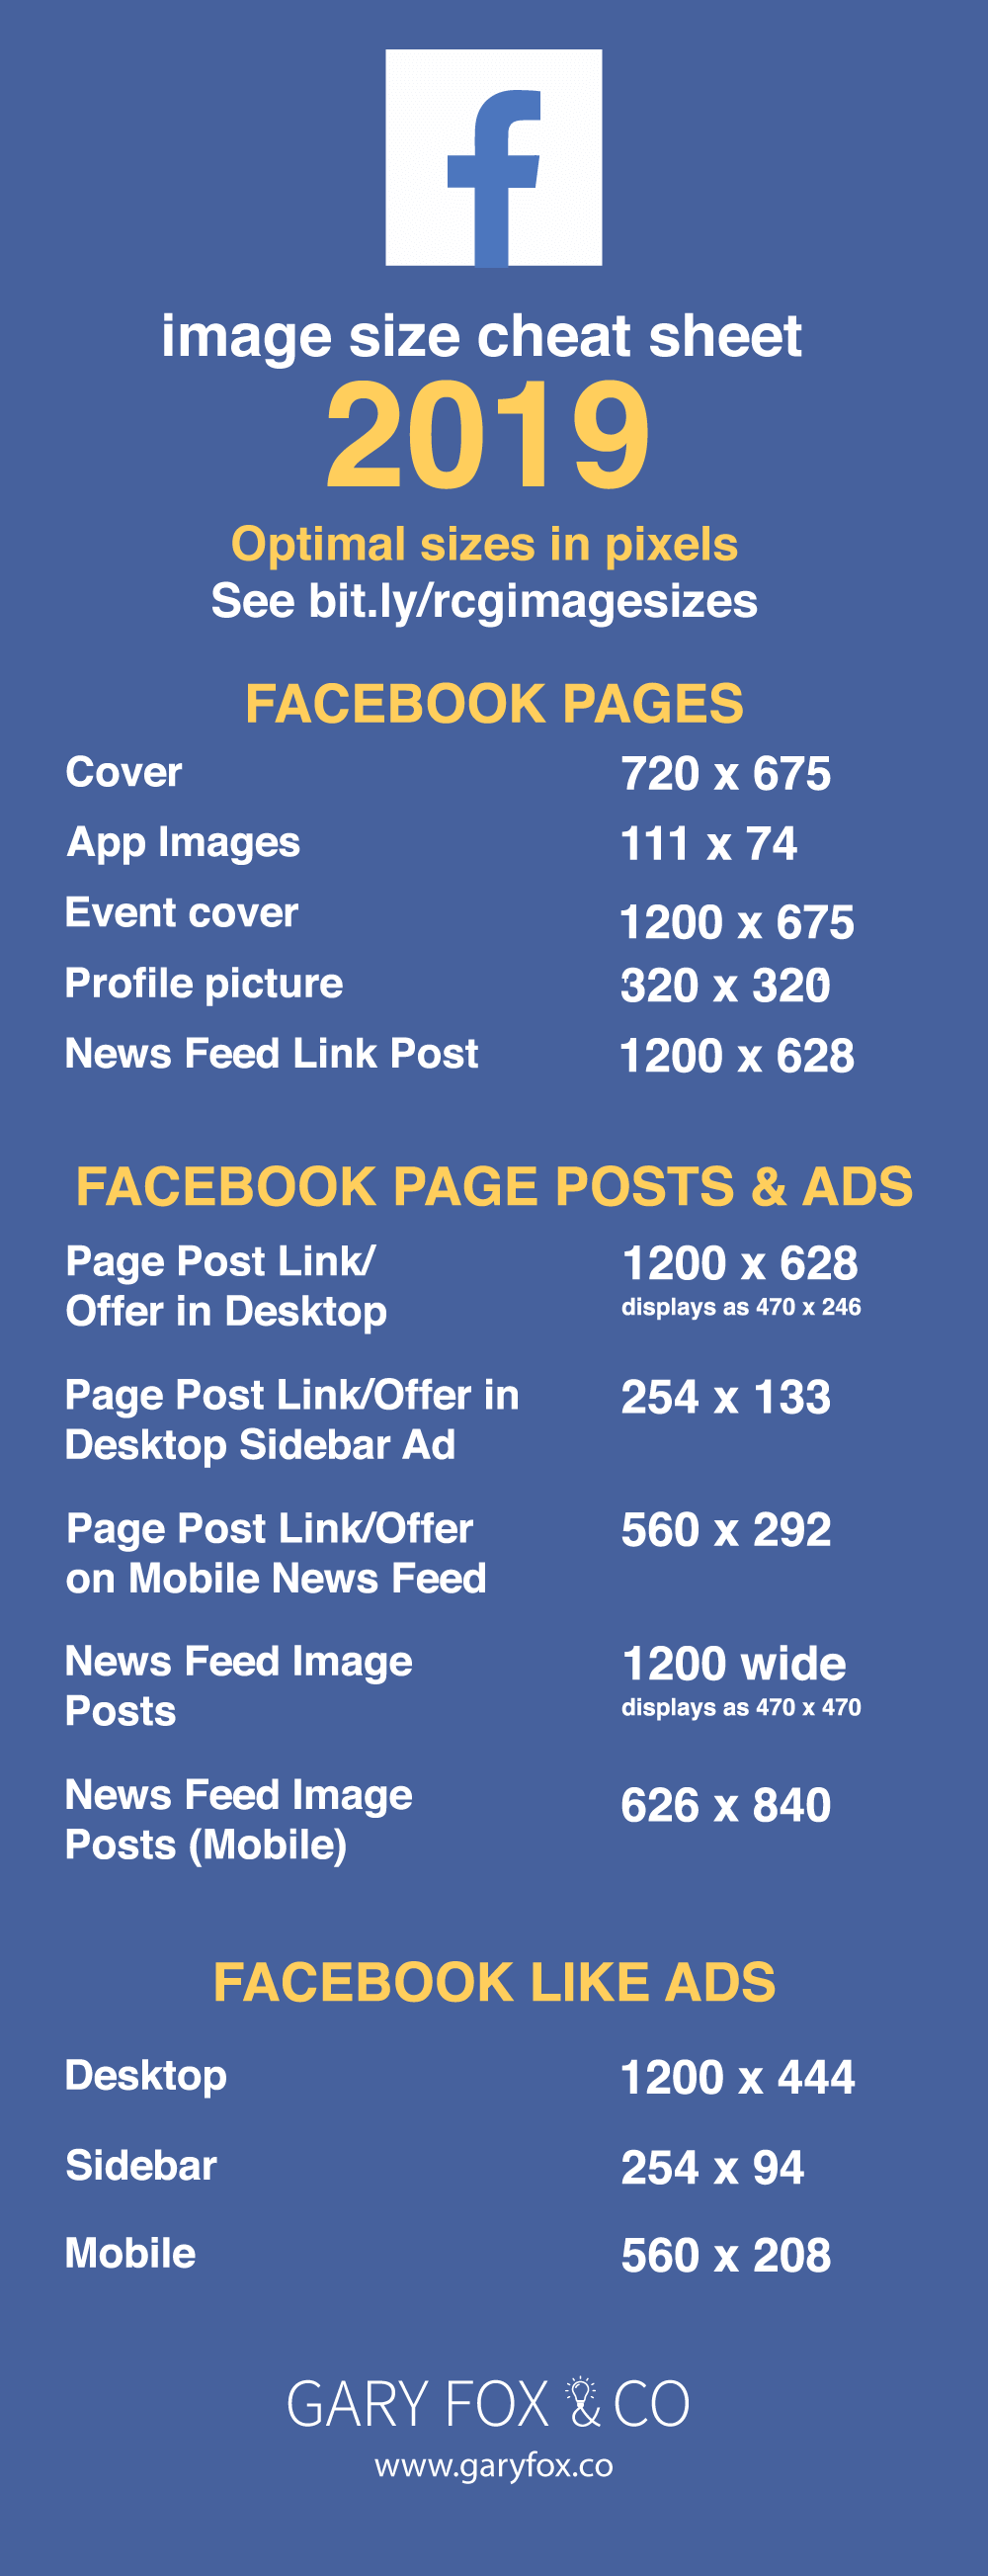 Facebook Image Sizes 2019 - Ultimate Guide and Tips 1